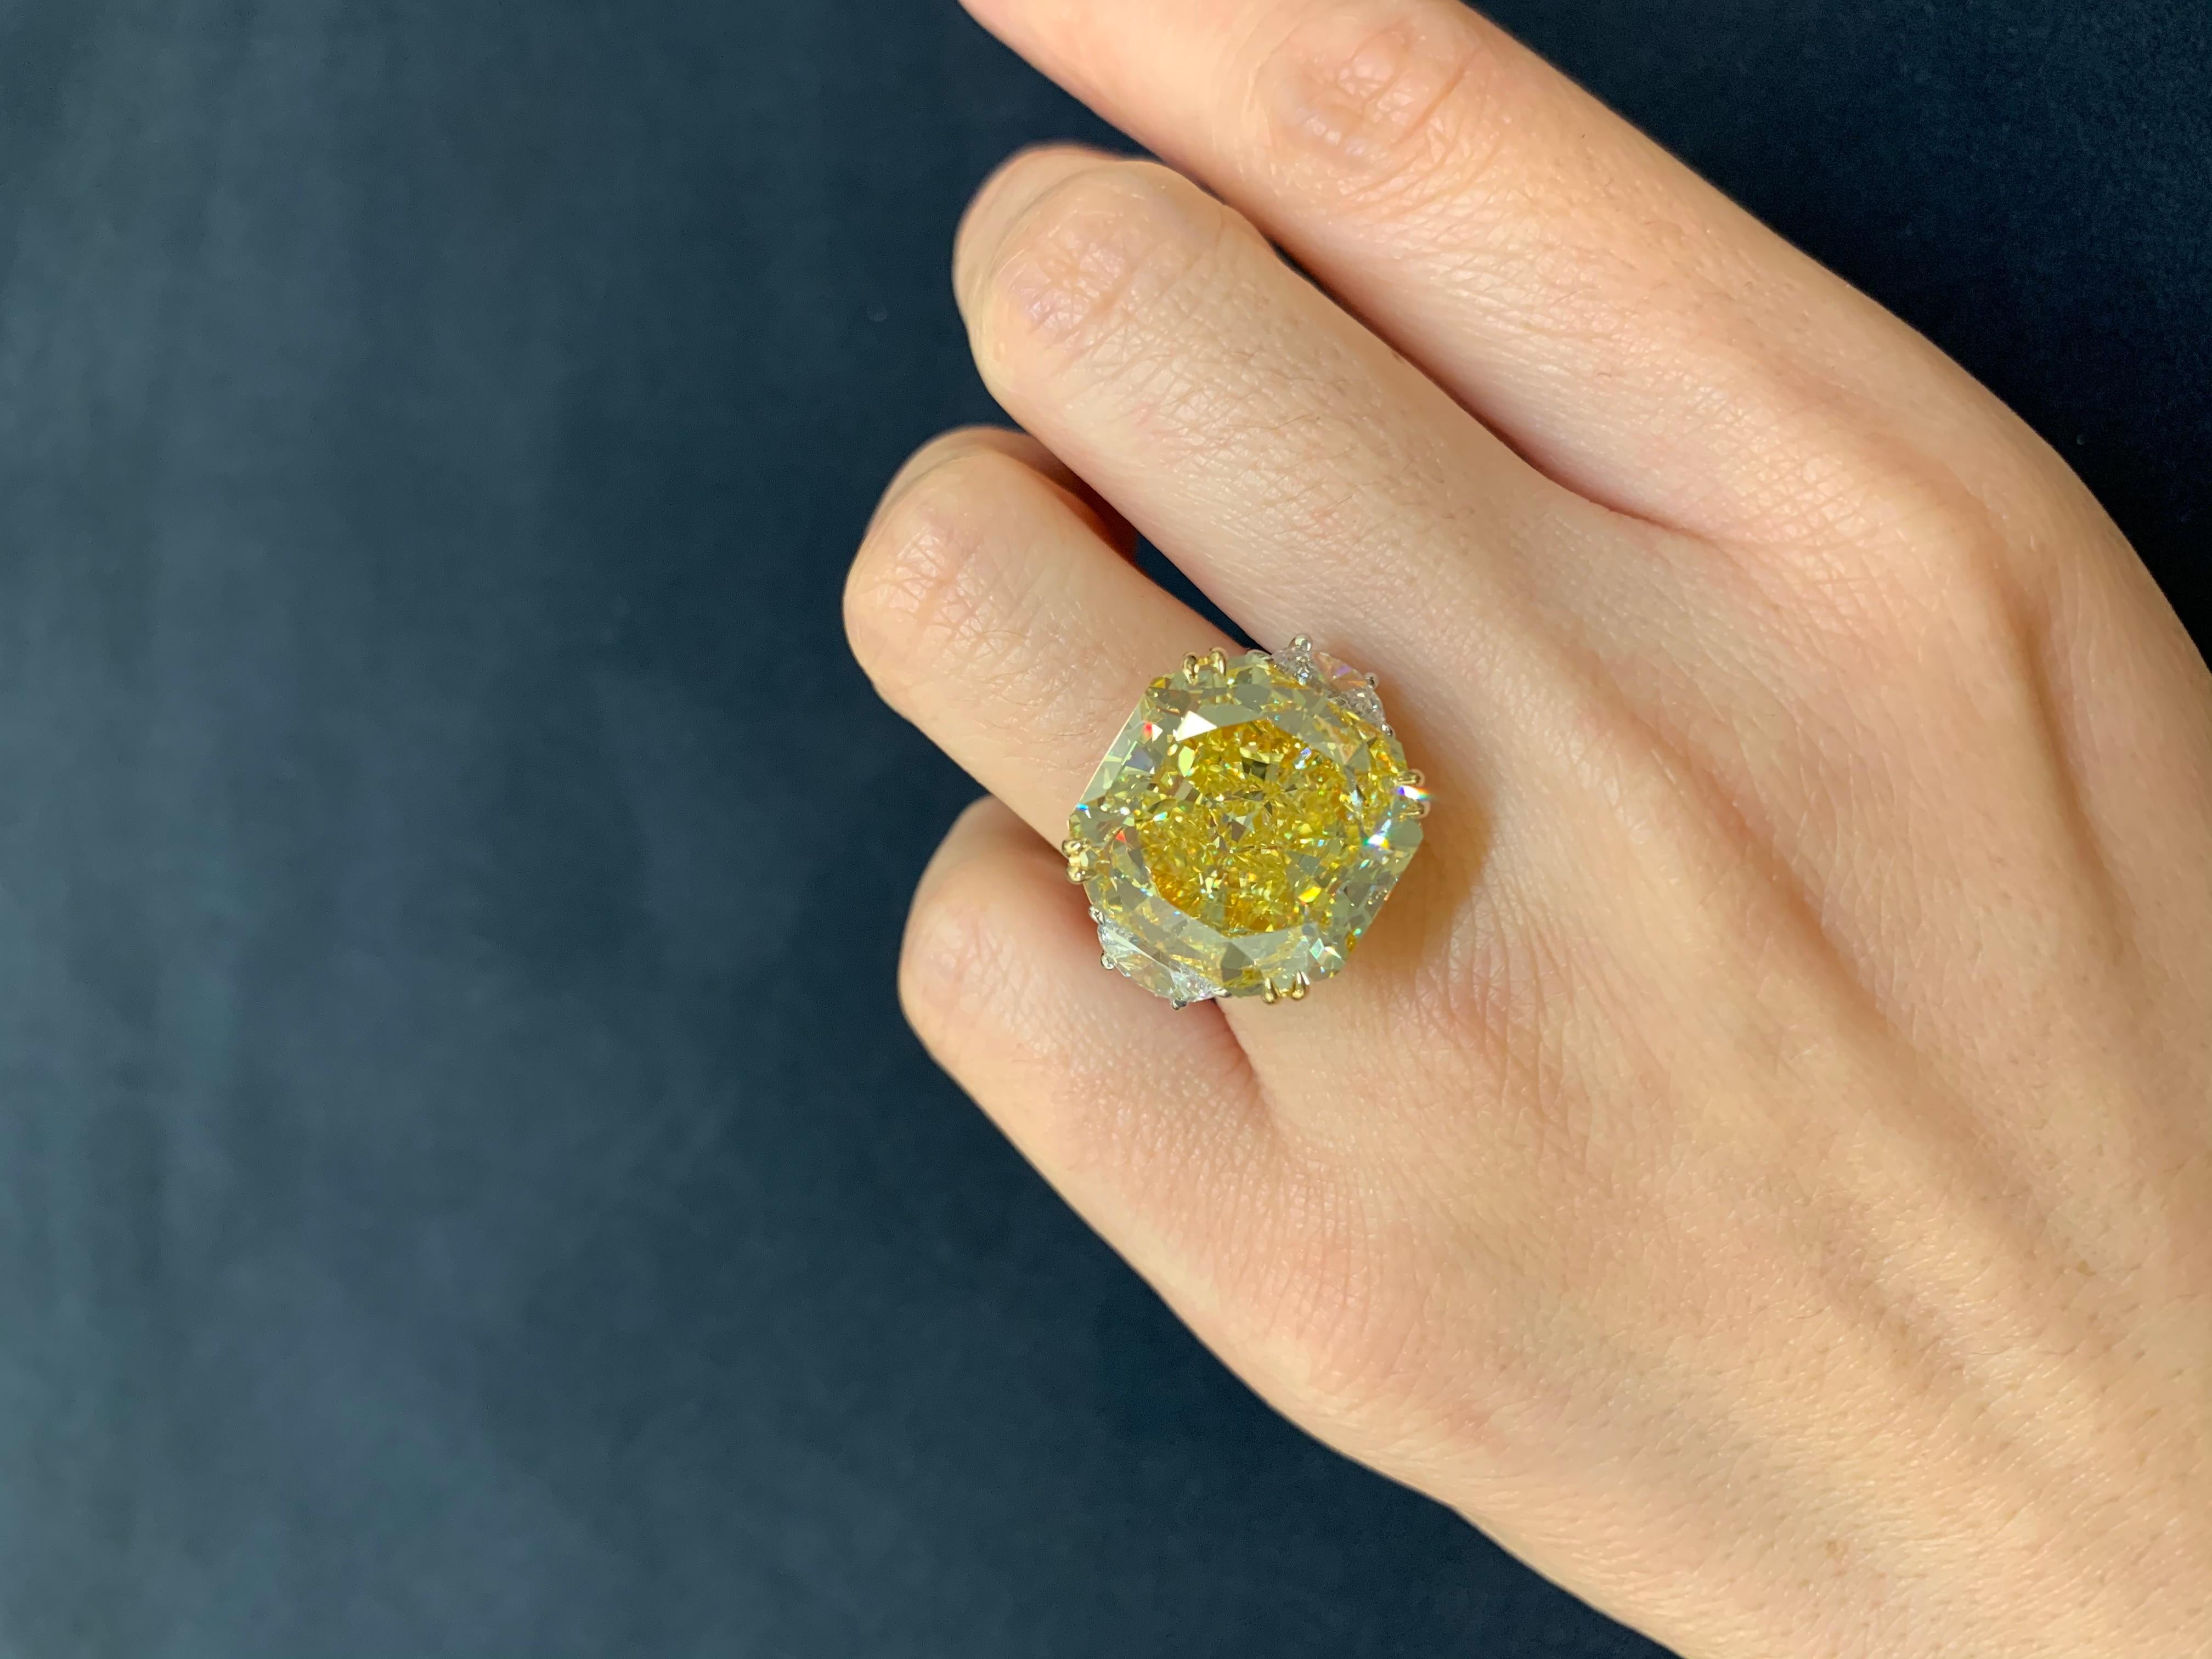 This astonishes classic ring From Scarselli features a 20-carat Fancy Vivid Yellow Radiant Cut Diamond with GIA certificate 5151483883 (see Certificate picture for detailed stone information). The center diamond is surrounded by 1.10 carat of